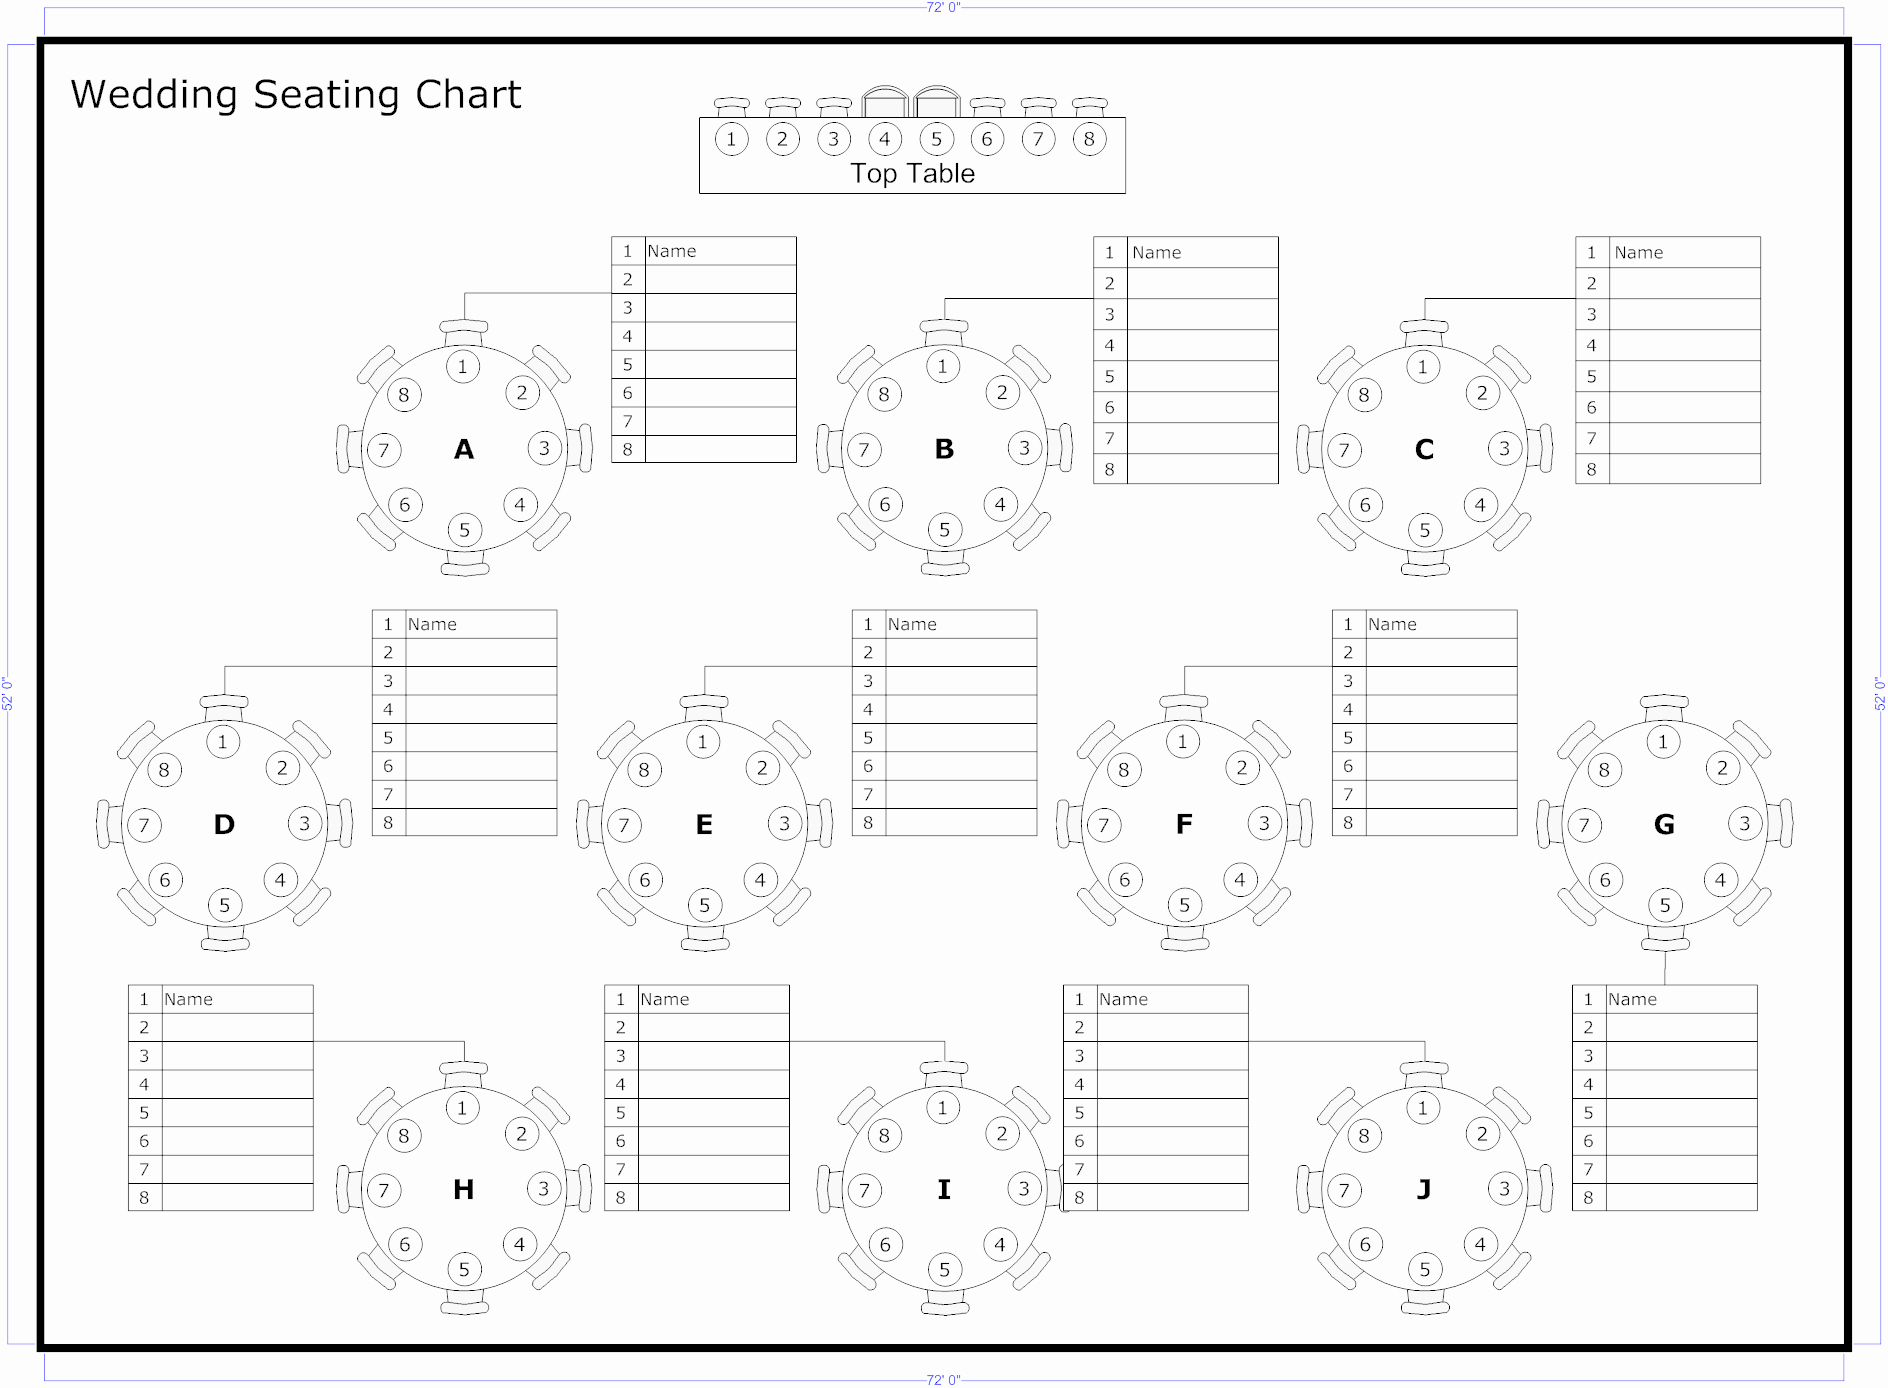 Seating Chart Template Word Awesome Seating Chart Make A Seating Chart Seating Chart Templates